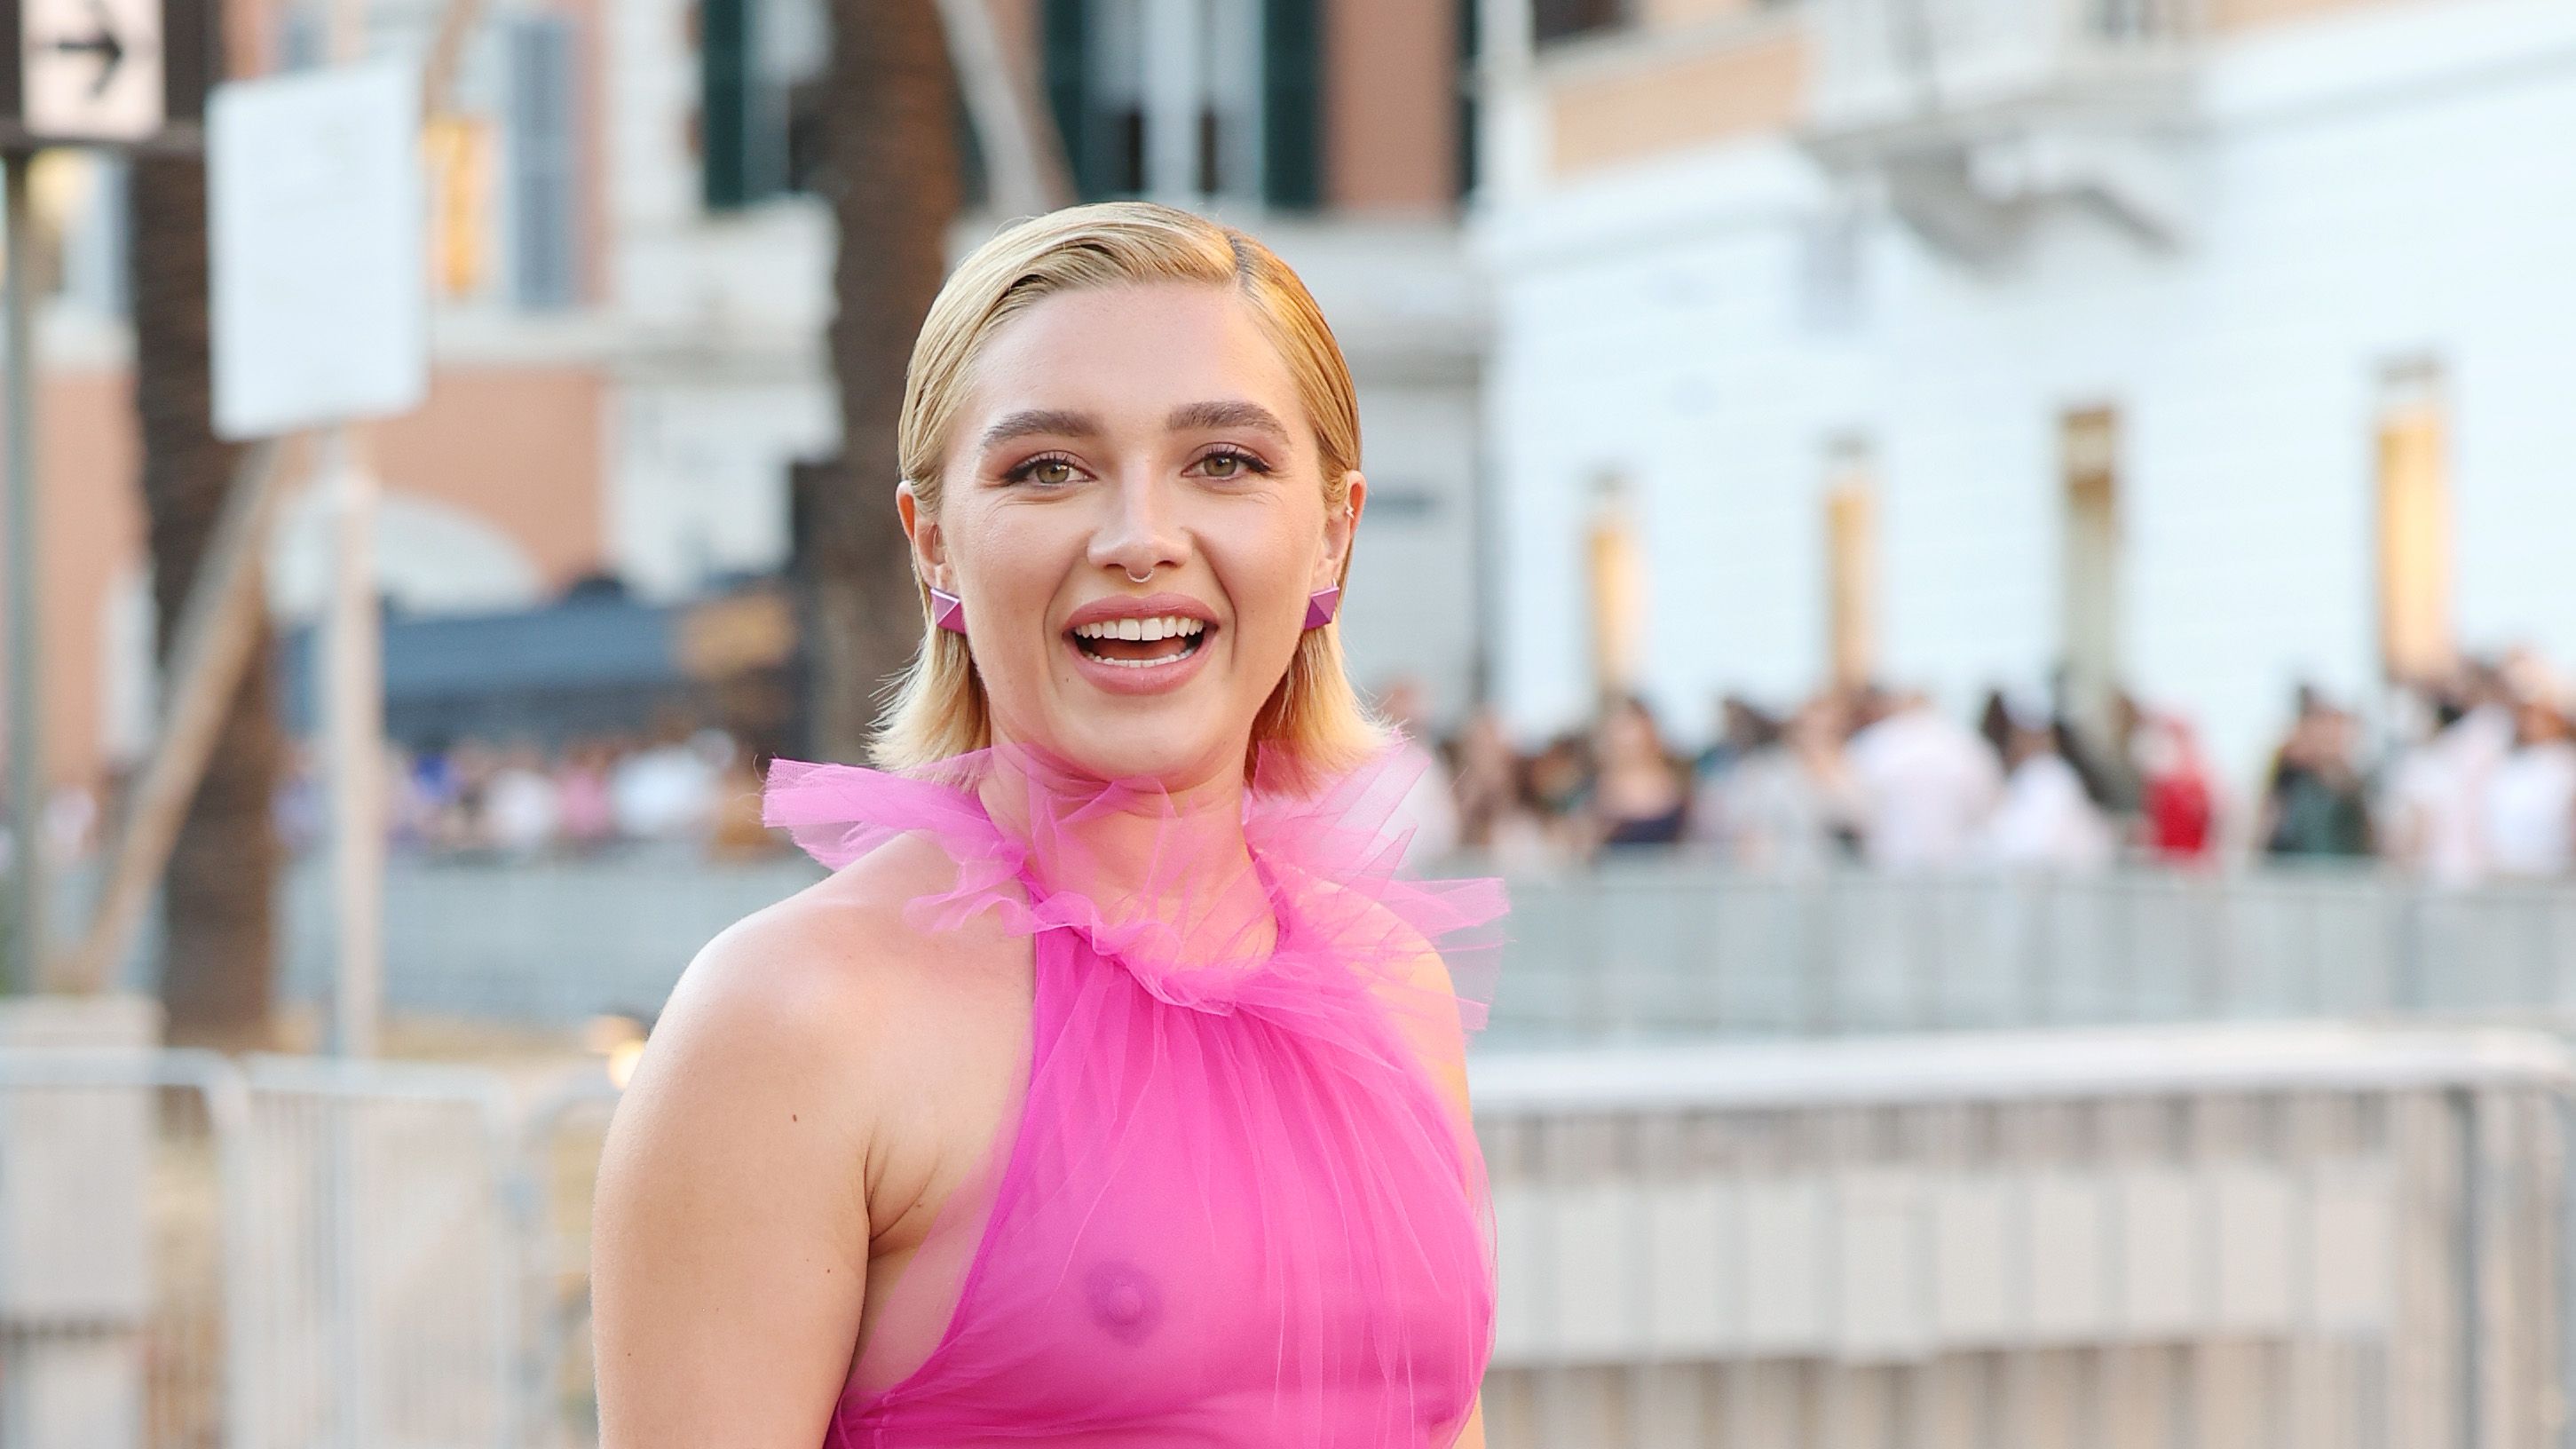 Florence Pugh on Backlash to Her Showing Nipples in Sheer Dress